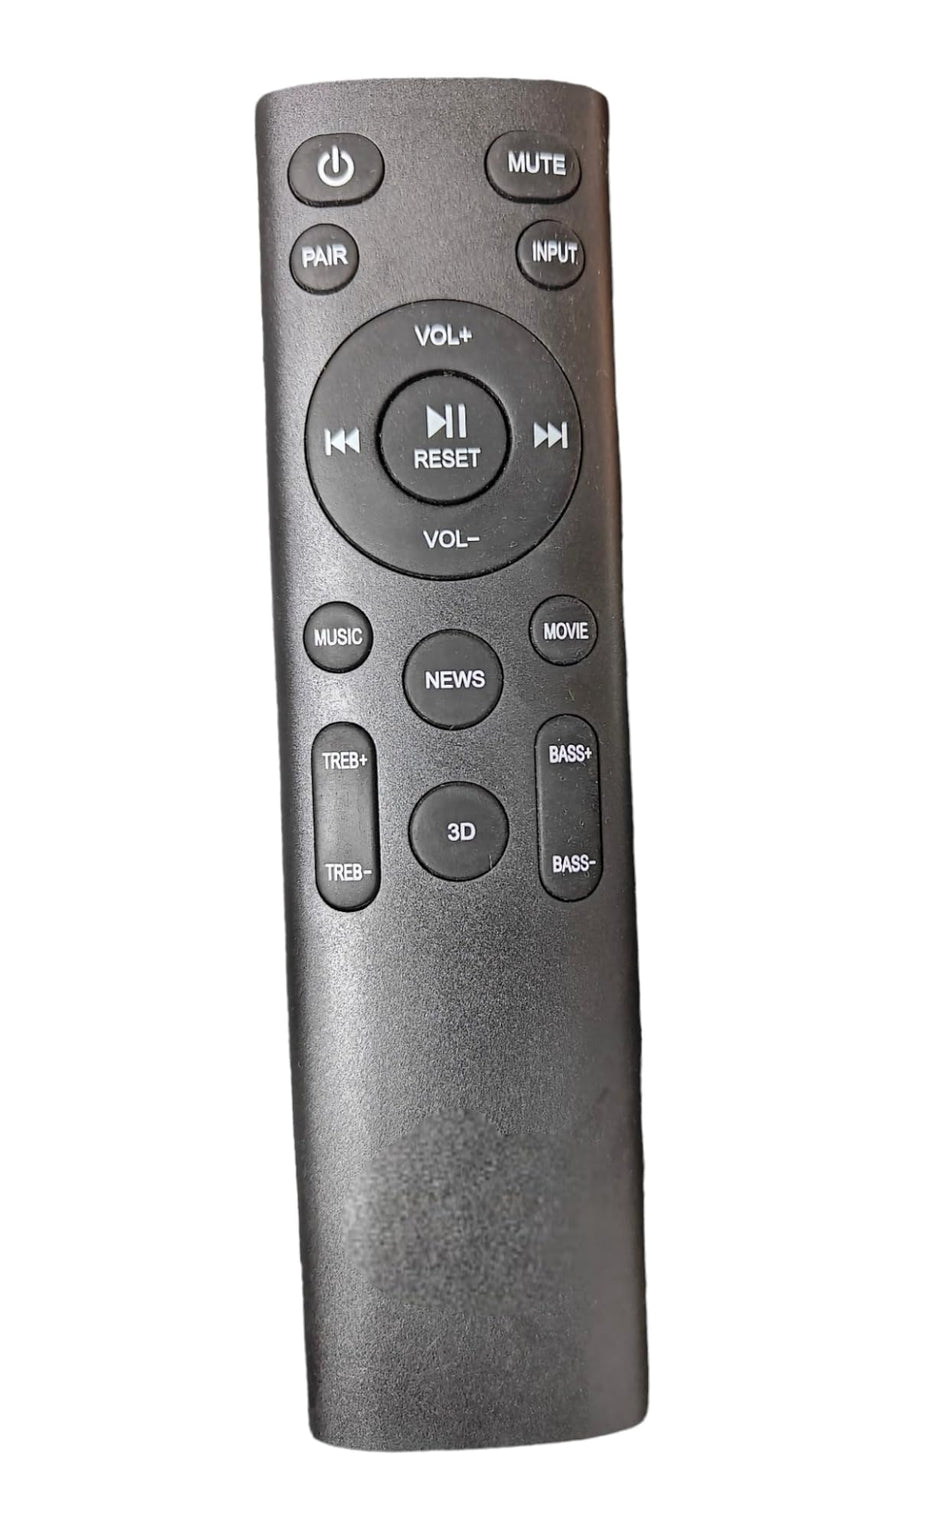 Ehop Compatible Remote Control for ZEBRONICS JukeBAR 3900 Zeb-Juke BAR 3500 Jukebar 9800 soundbar 6000 SOUNDBAR Remote (Old Remote Must BE Same AS The Picture)